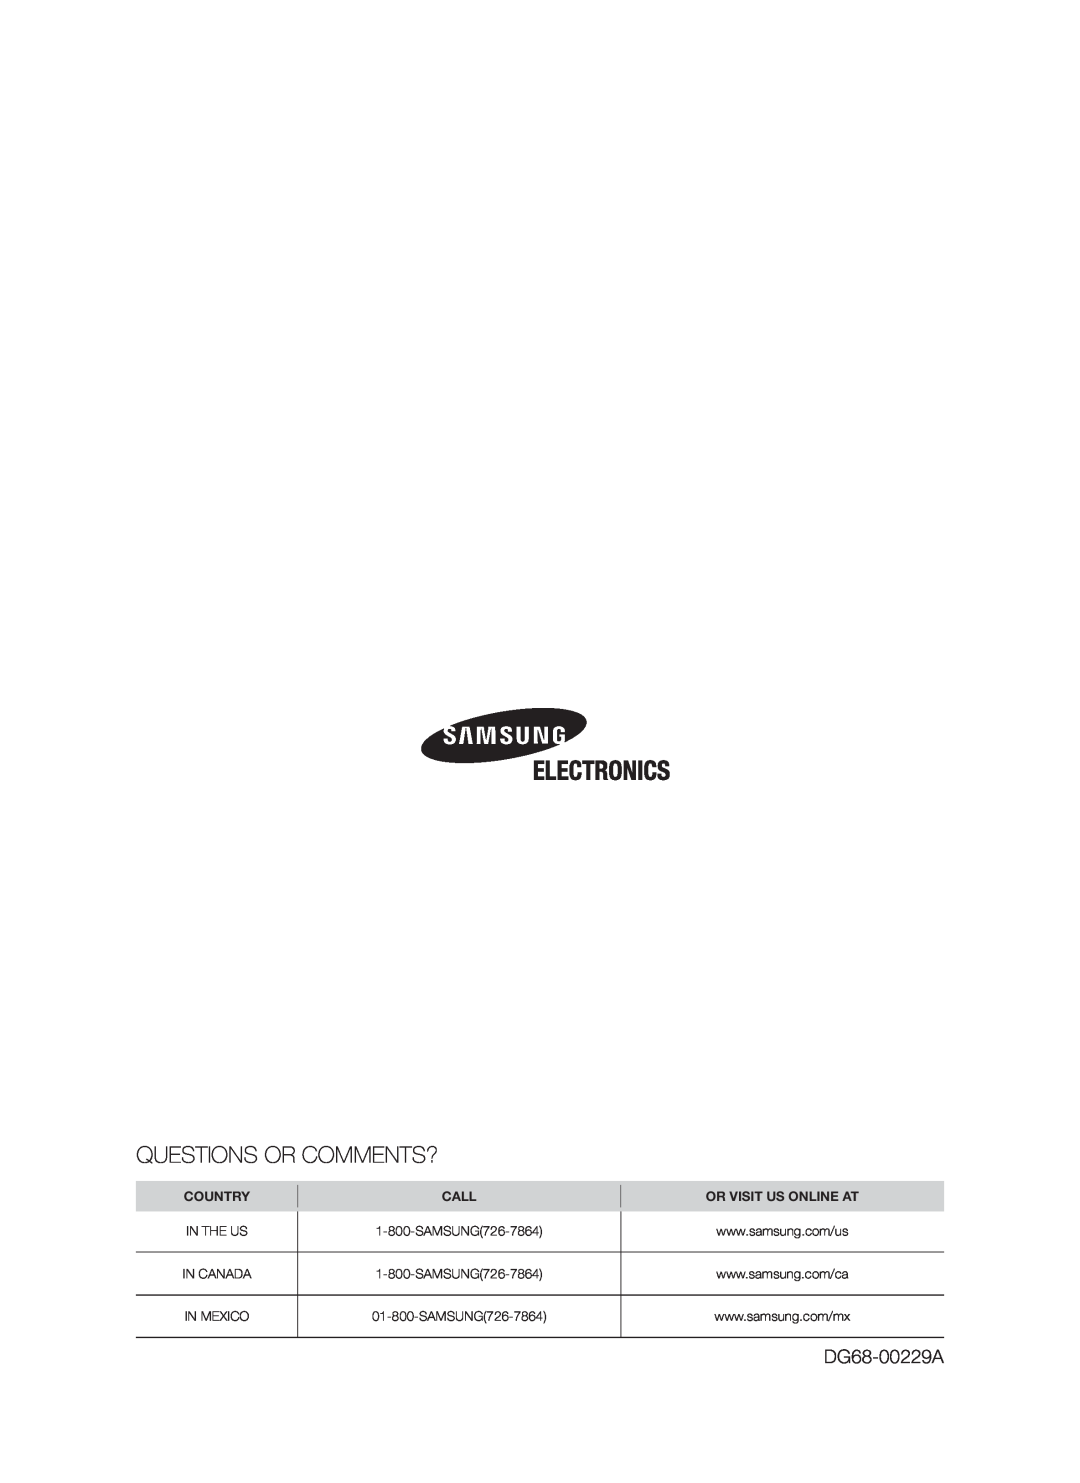 Samsung FTQ307NWGX DG68-00229A, Country, Call, Or Visit Us Online At, In The Us, SAMSUNG726-7864, In Canada, In Mexico 